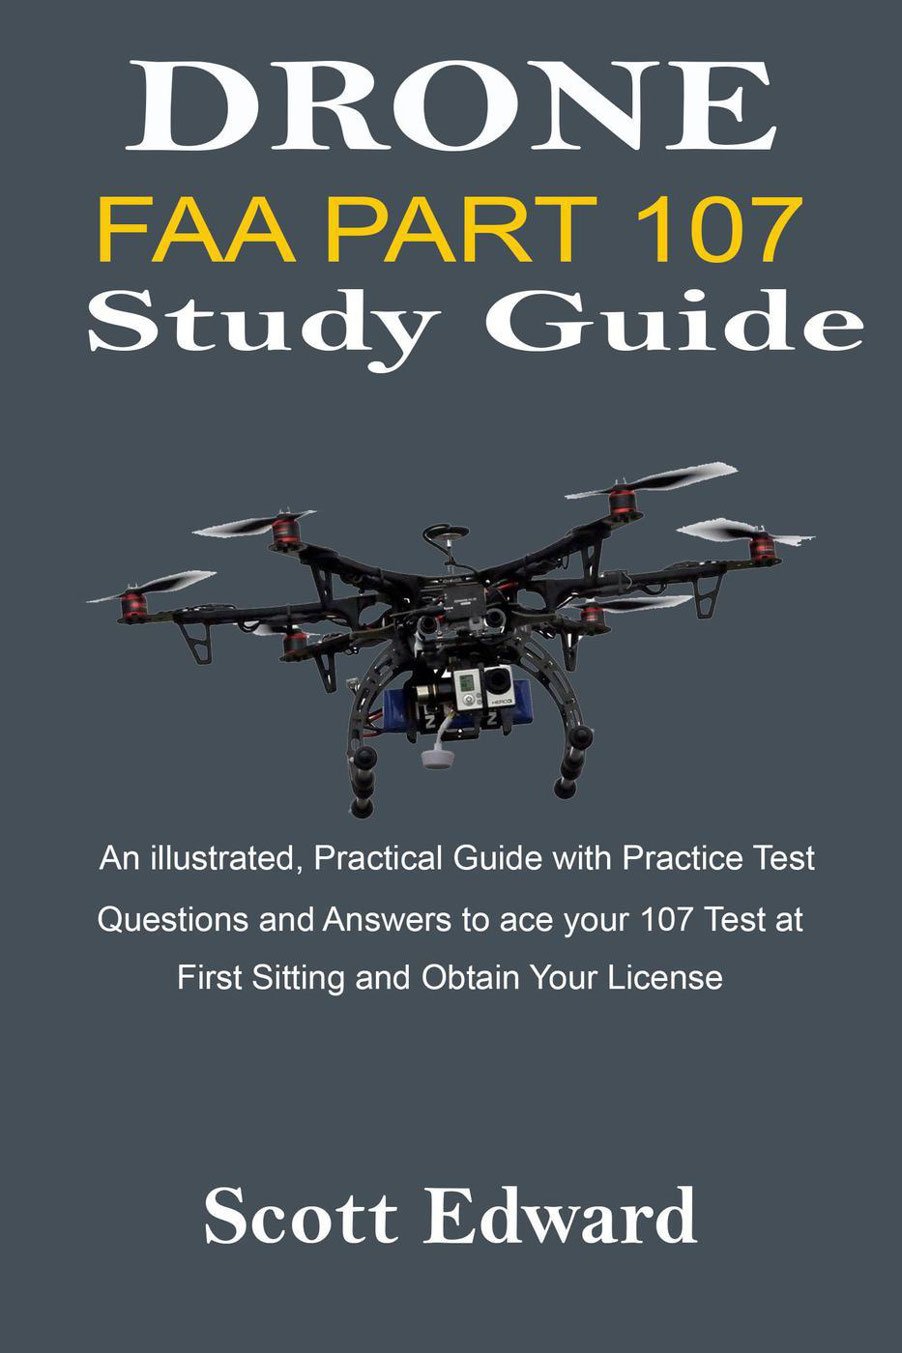 drone-faa-part-107-study-guide-an-illustrated-practical-guide-with-practice-test-questions-and